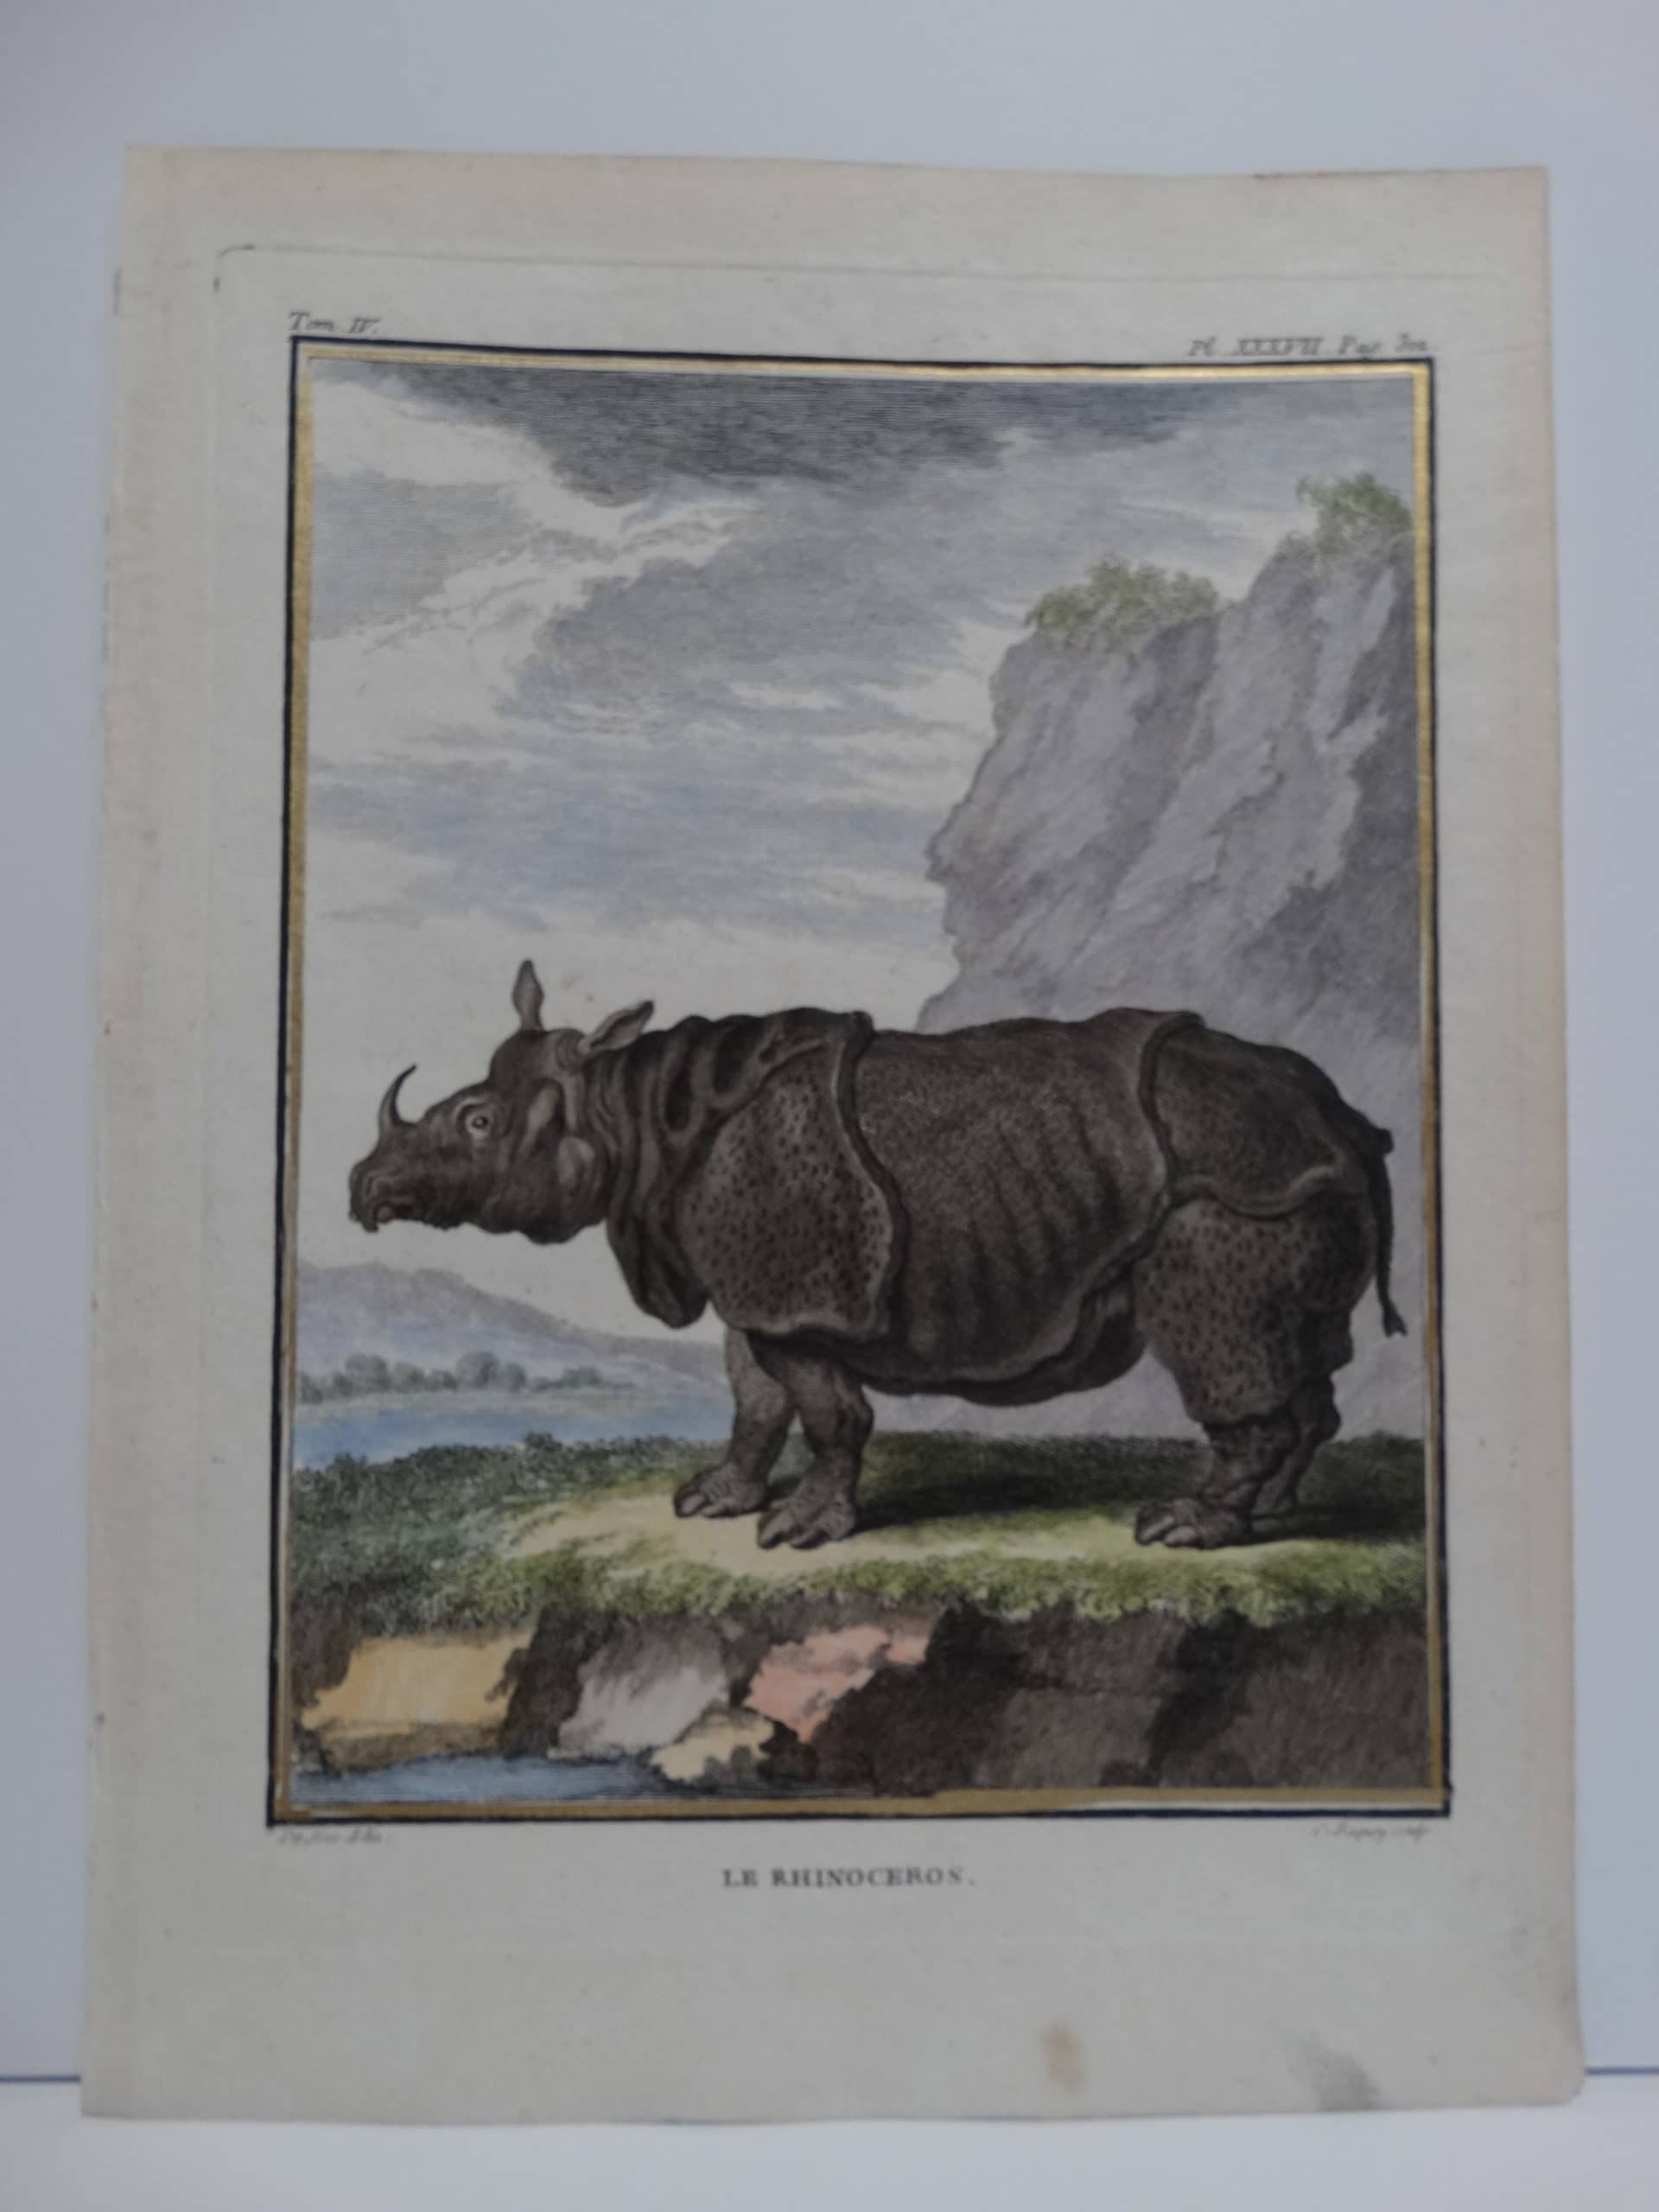 This antique print is a 18th century hand-colored engraving of a thick armoured rhinocerous with one horn.